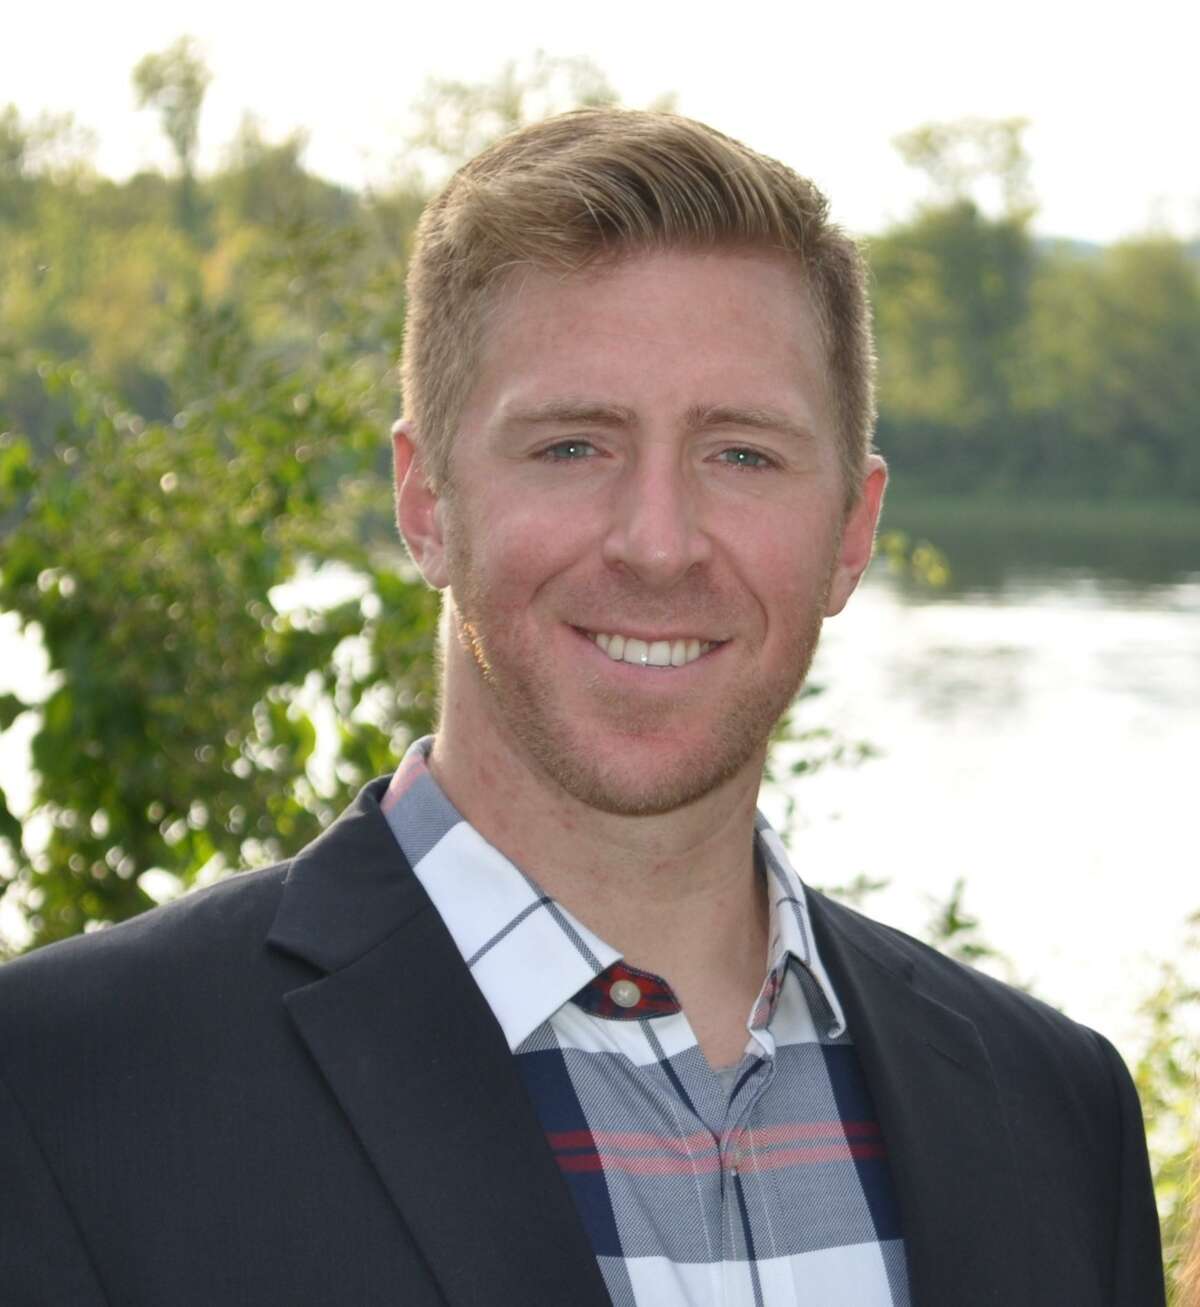 Ryan Curley is a Republican candidate for Portland’s First Selectman.